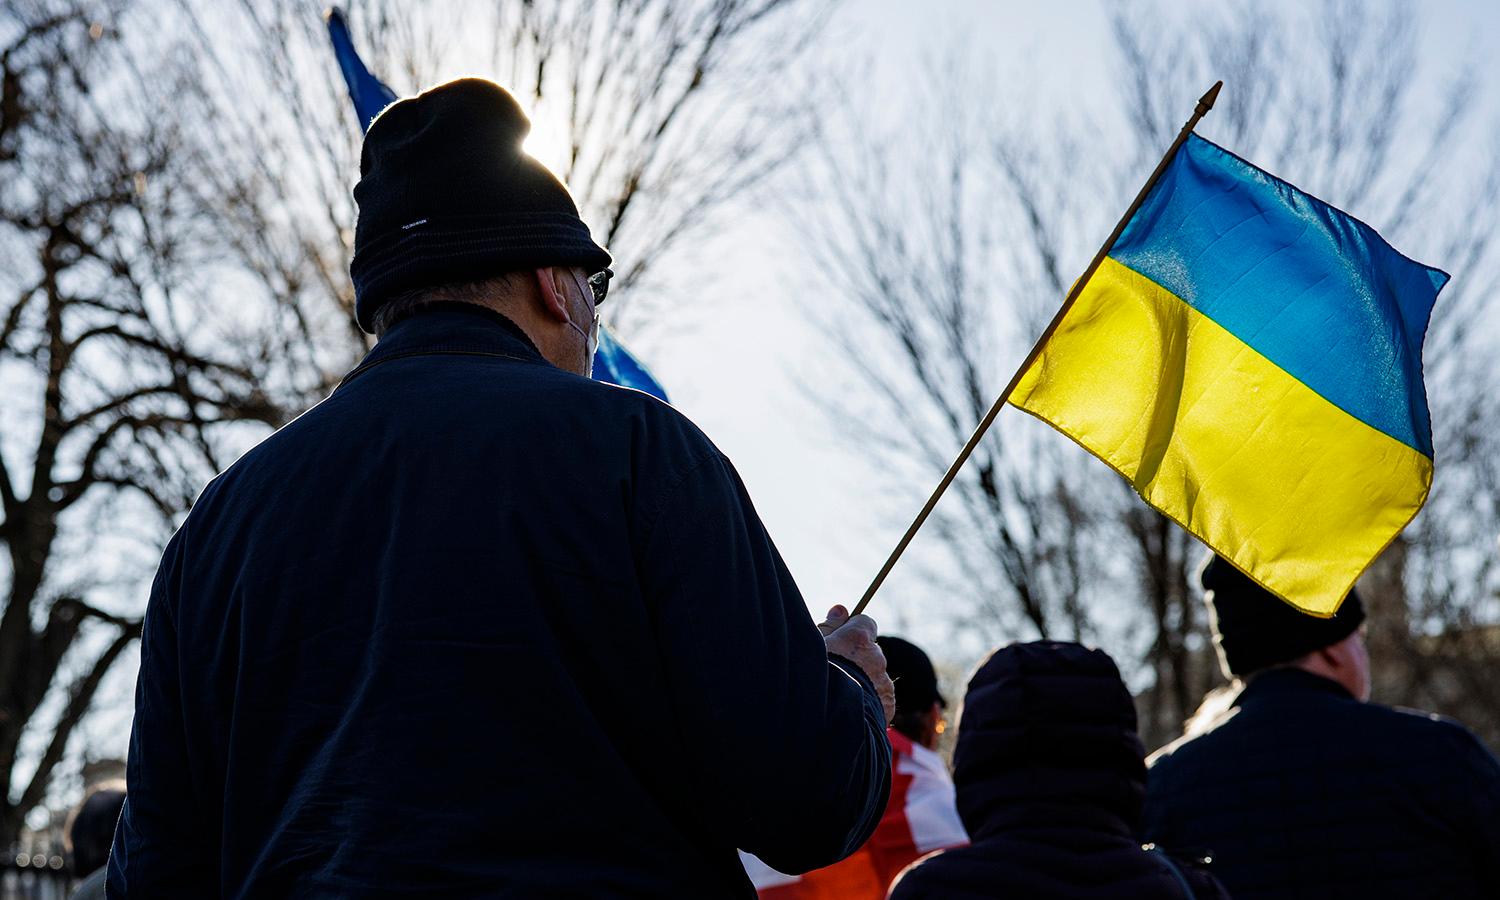 Pro-Ukrainian activists gather for a prayer and demonstration against Russian aggression in front of the White House on Feb. 6, 2022, in Washington. (Photo by Samuel Corum/Getty Images)